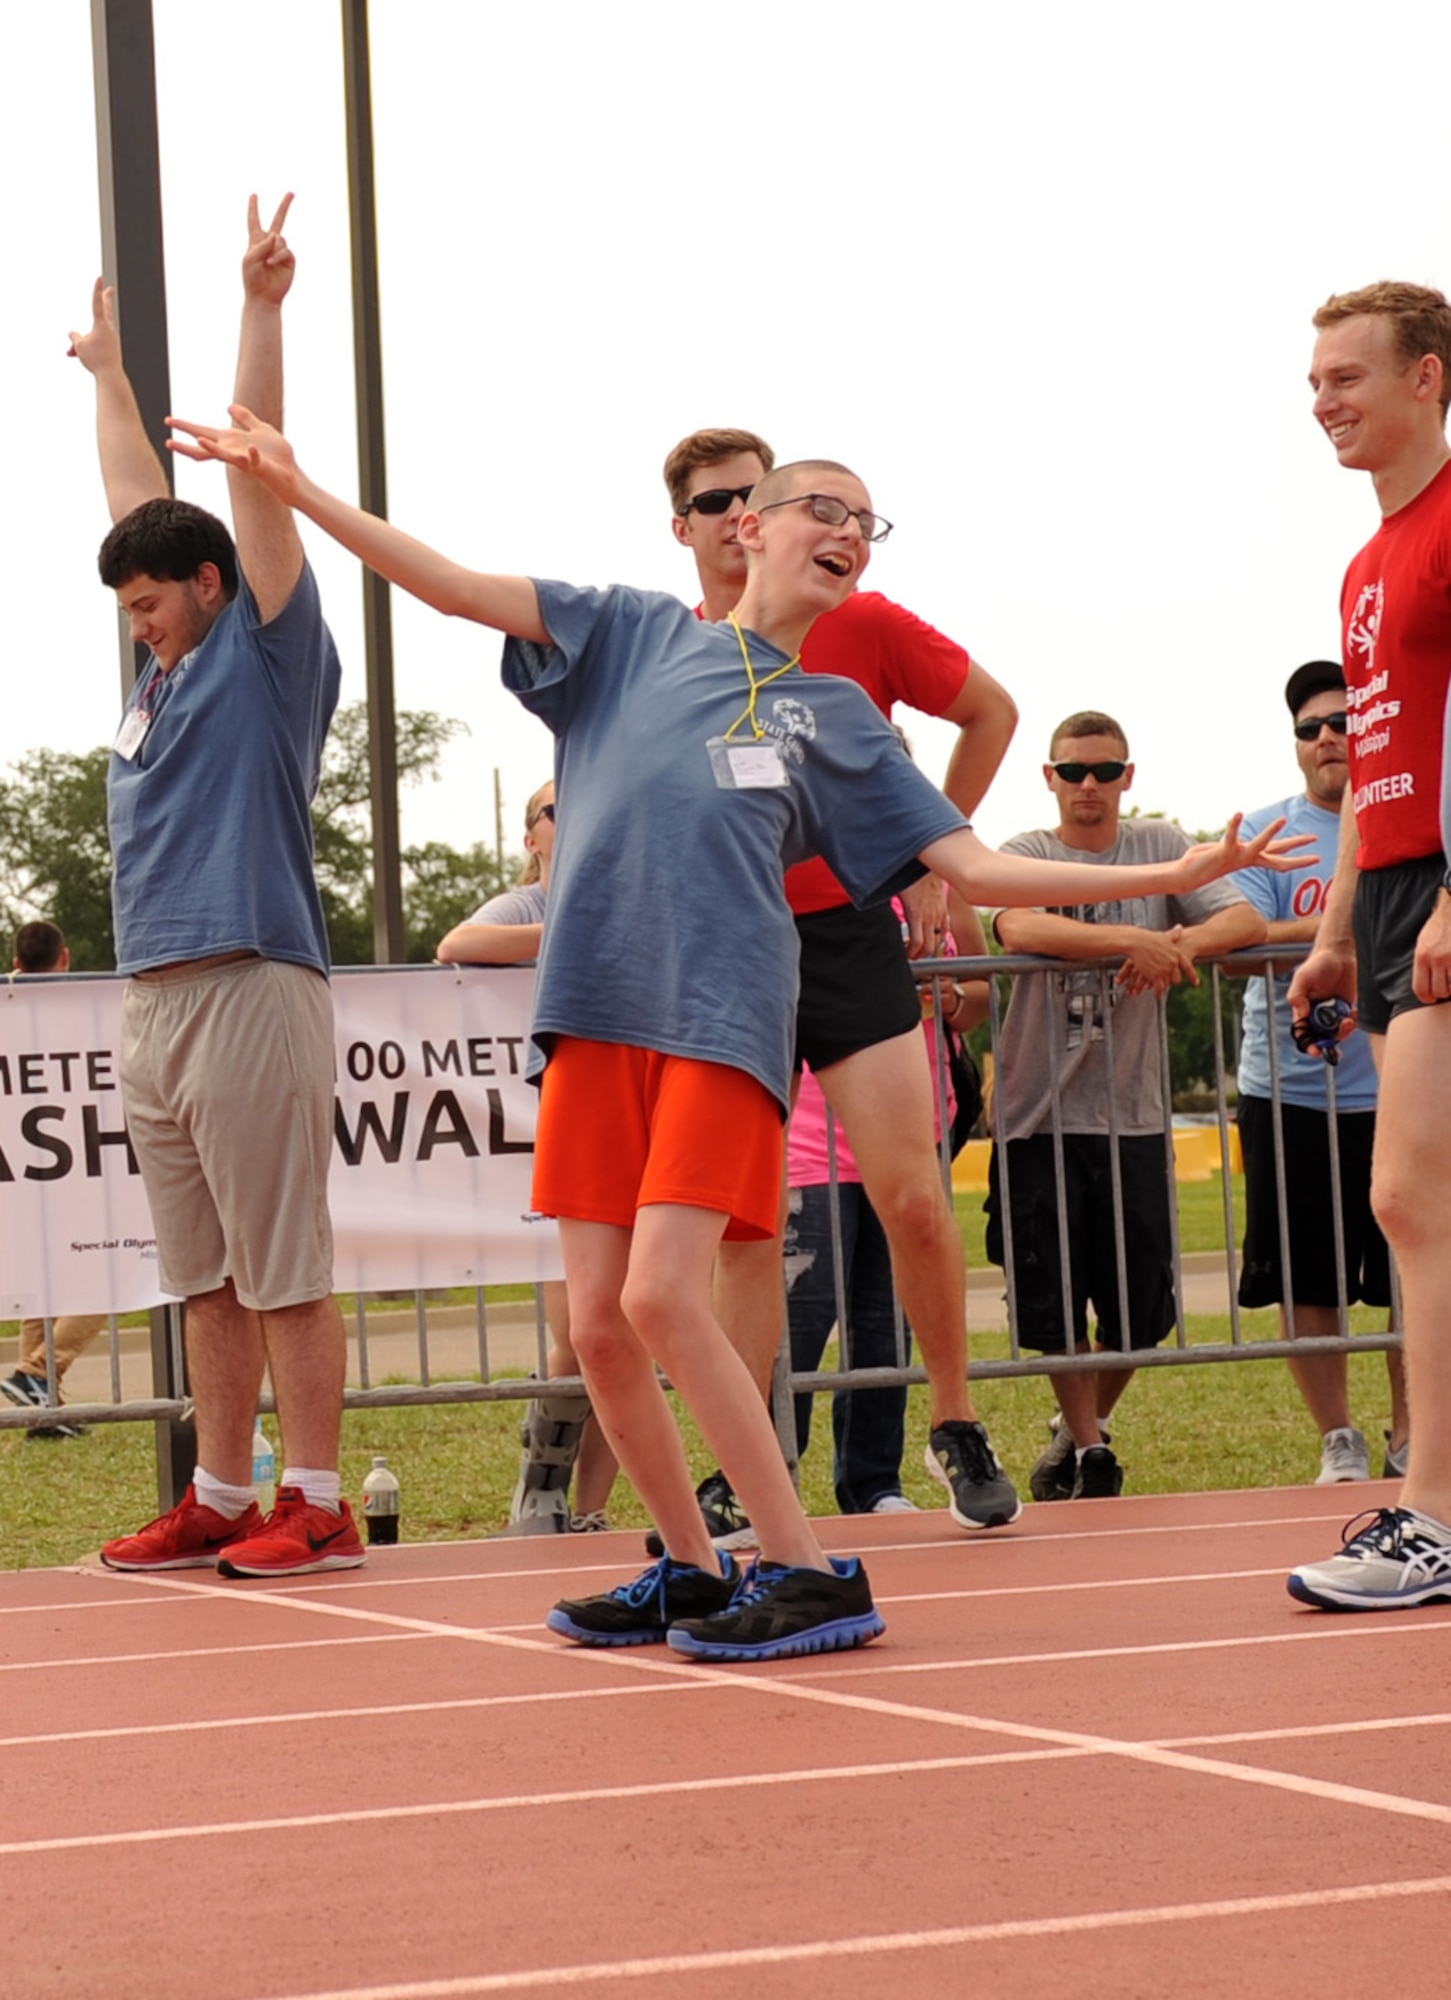 Athletes react to the announcement of their names at the track events during the Special Olympics Mississippi Summer Games at the triangle track May 21, 2016, Keesler Air Force Base, Miss. More than 700 athletes and 3,000 volunteers worked together to hold competitions throughout the day. This is the 30th year Keesler has hosted the state Special Olympics.  (U.S. Air Force photo by Kemberly Groue)